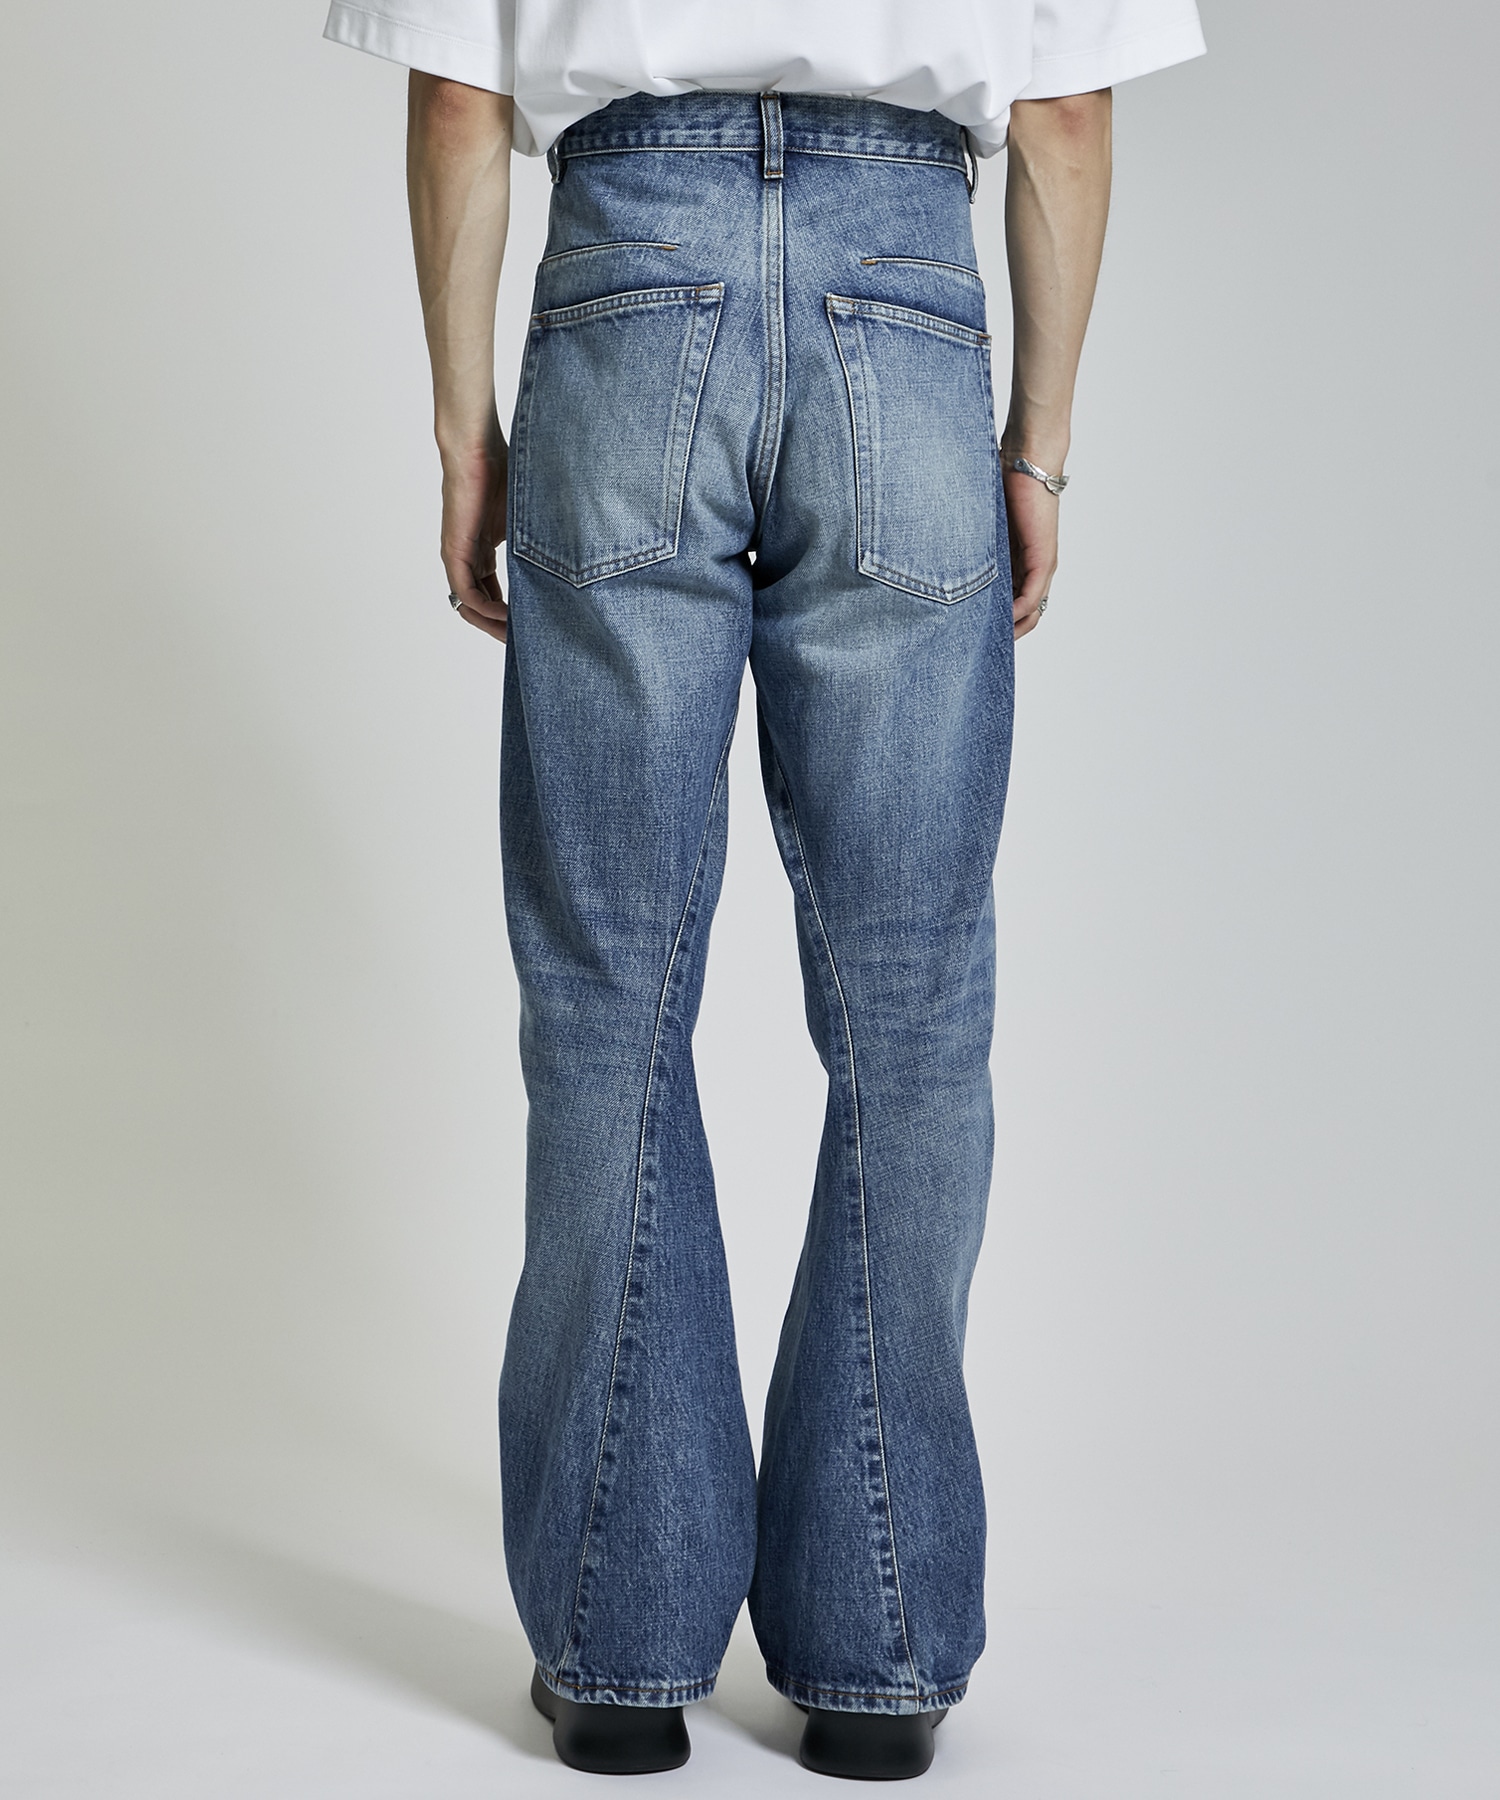 NVRFRGT 23SS 3D Twisted Jeans